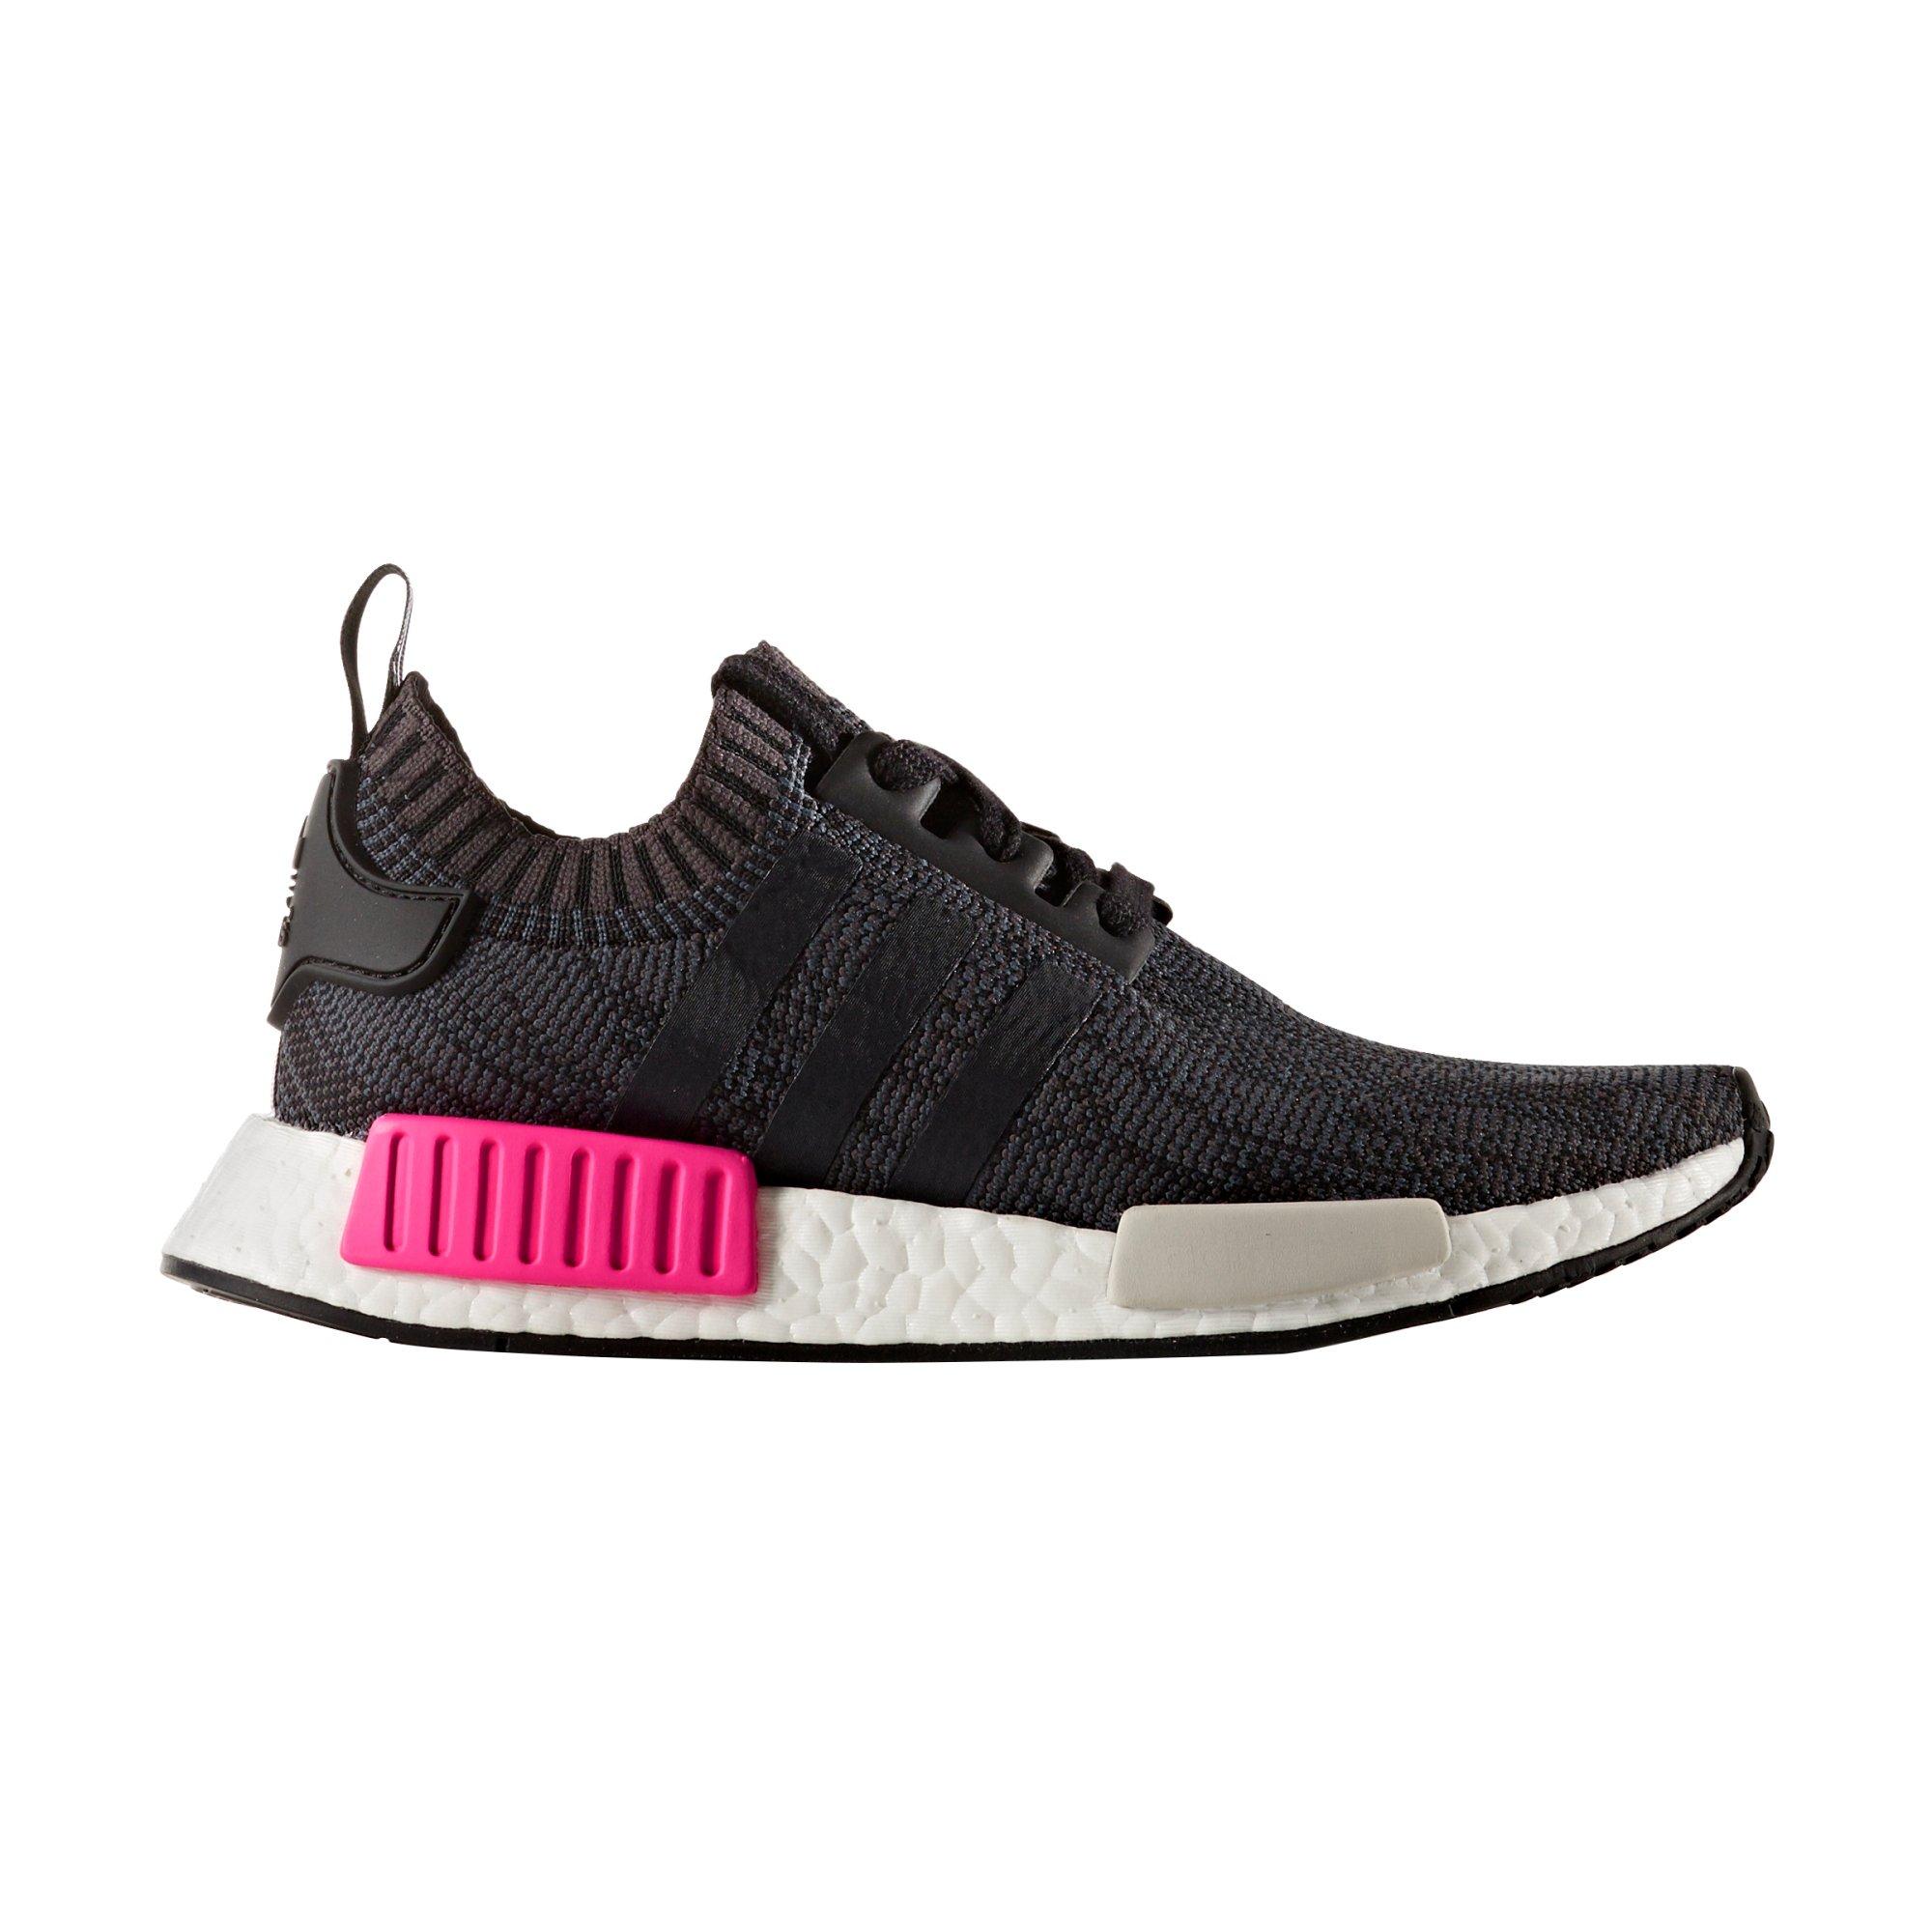 women's adidas nmd r1 casual shoes pink